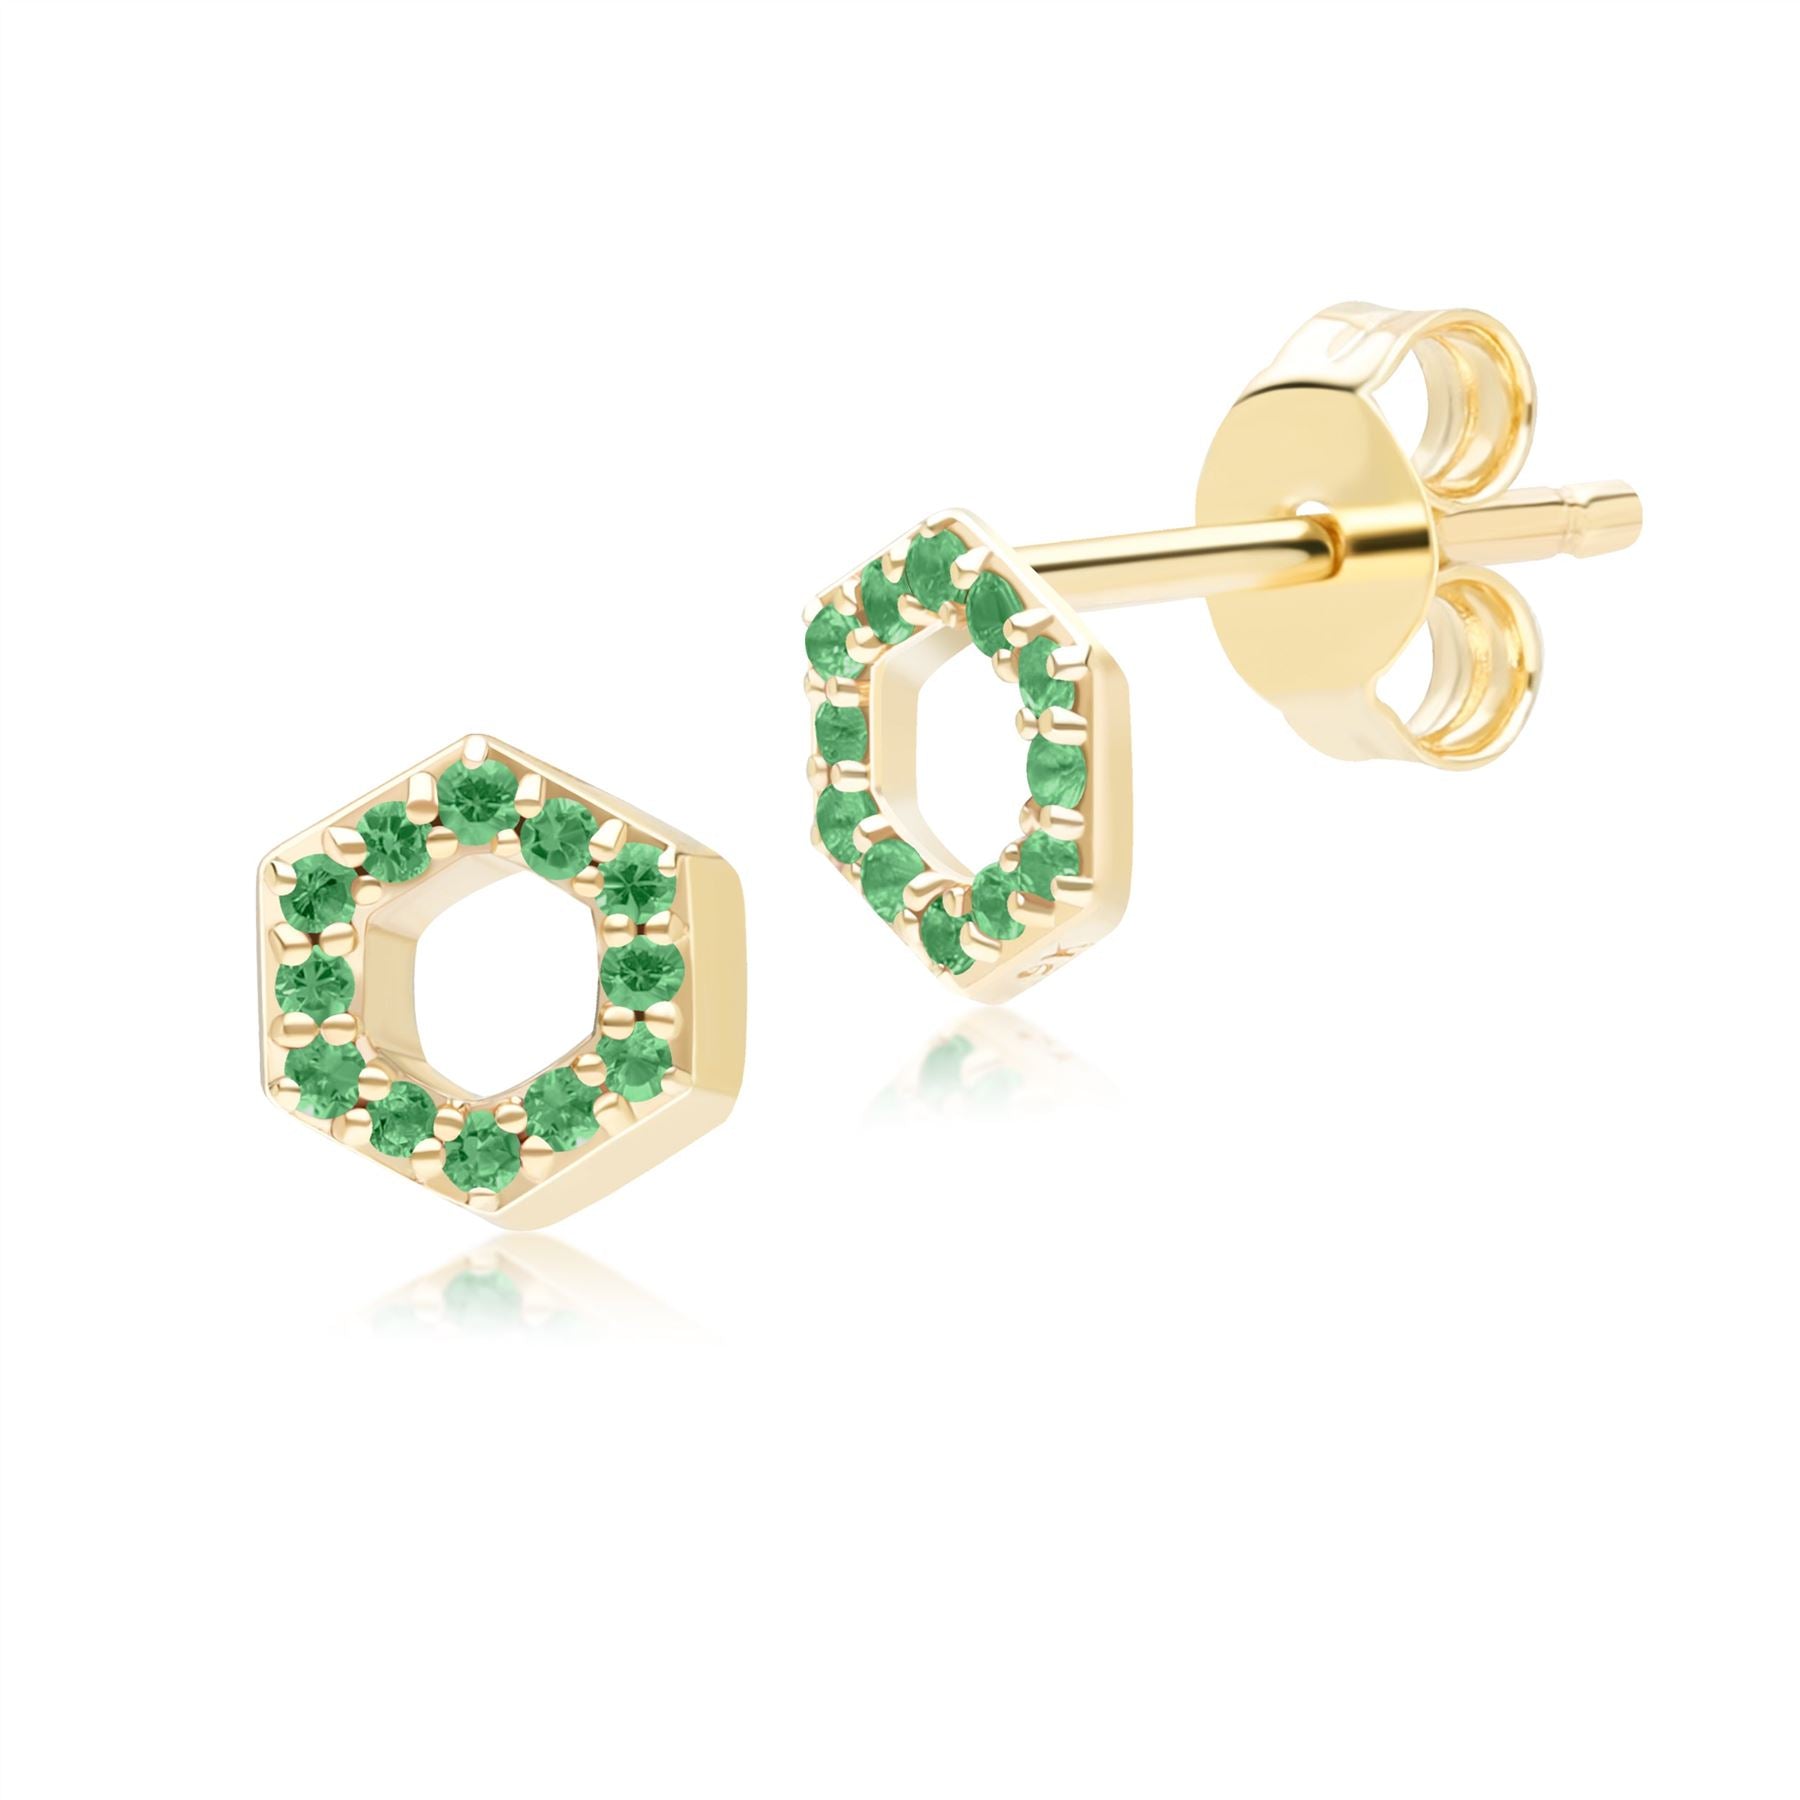 Geometric Hex Emerald Stud Earrings in 9ct Yellow Gold Front